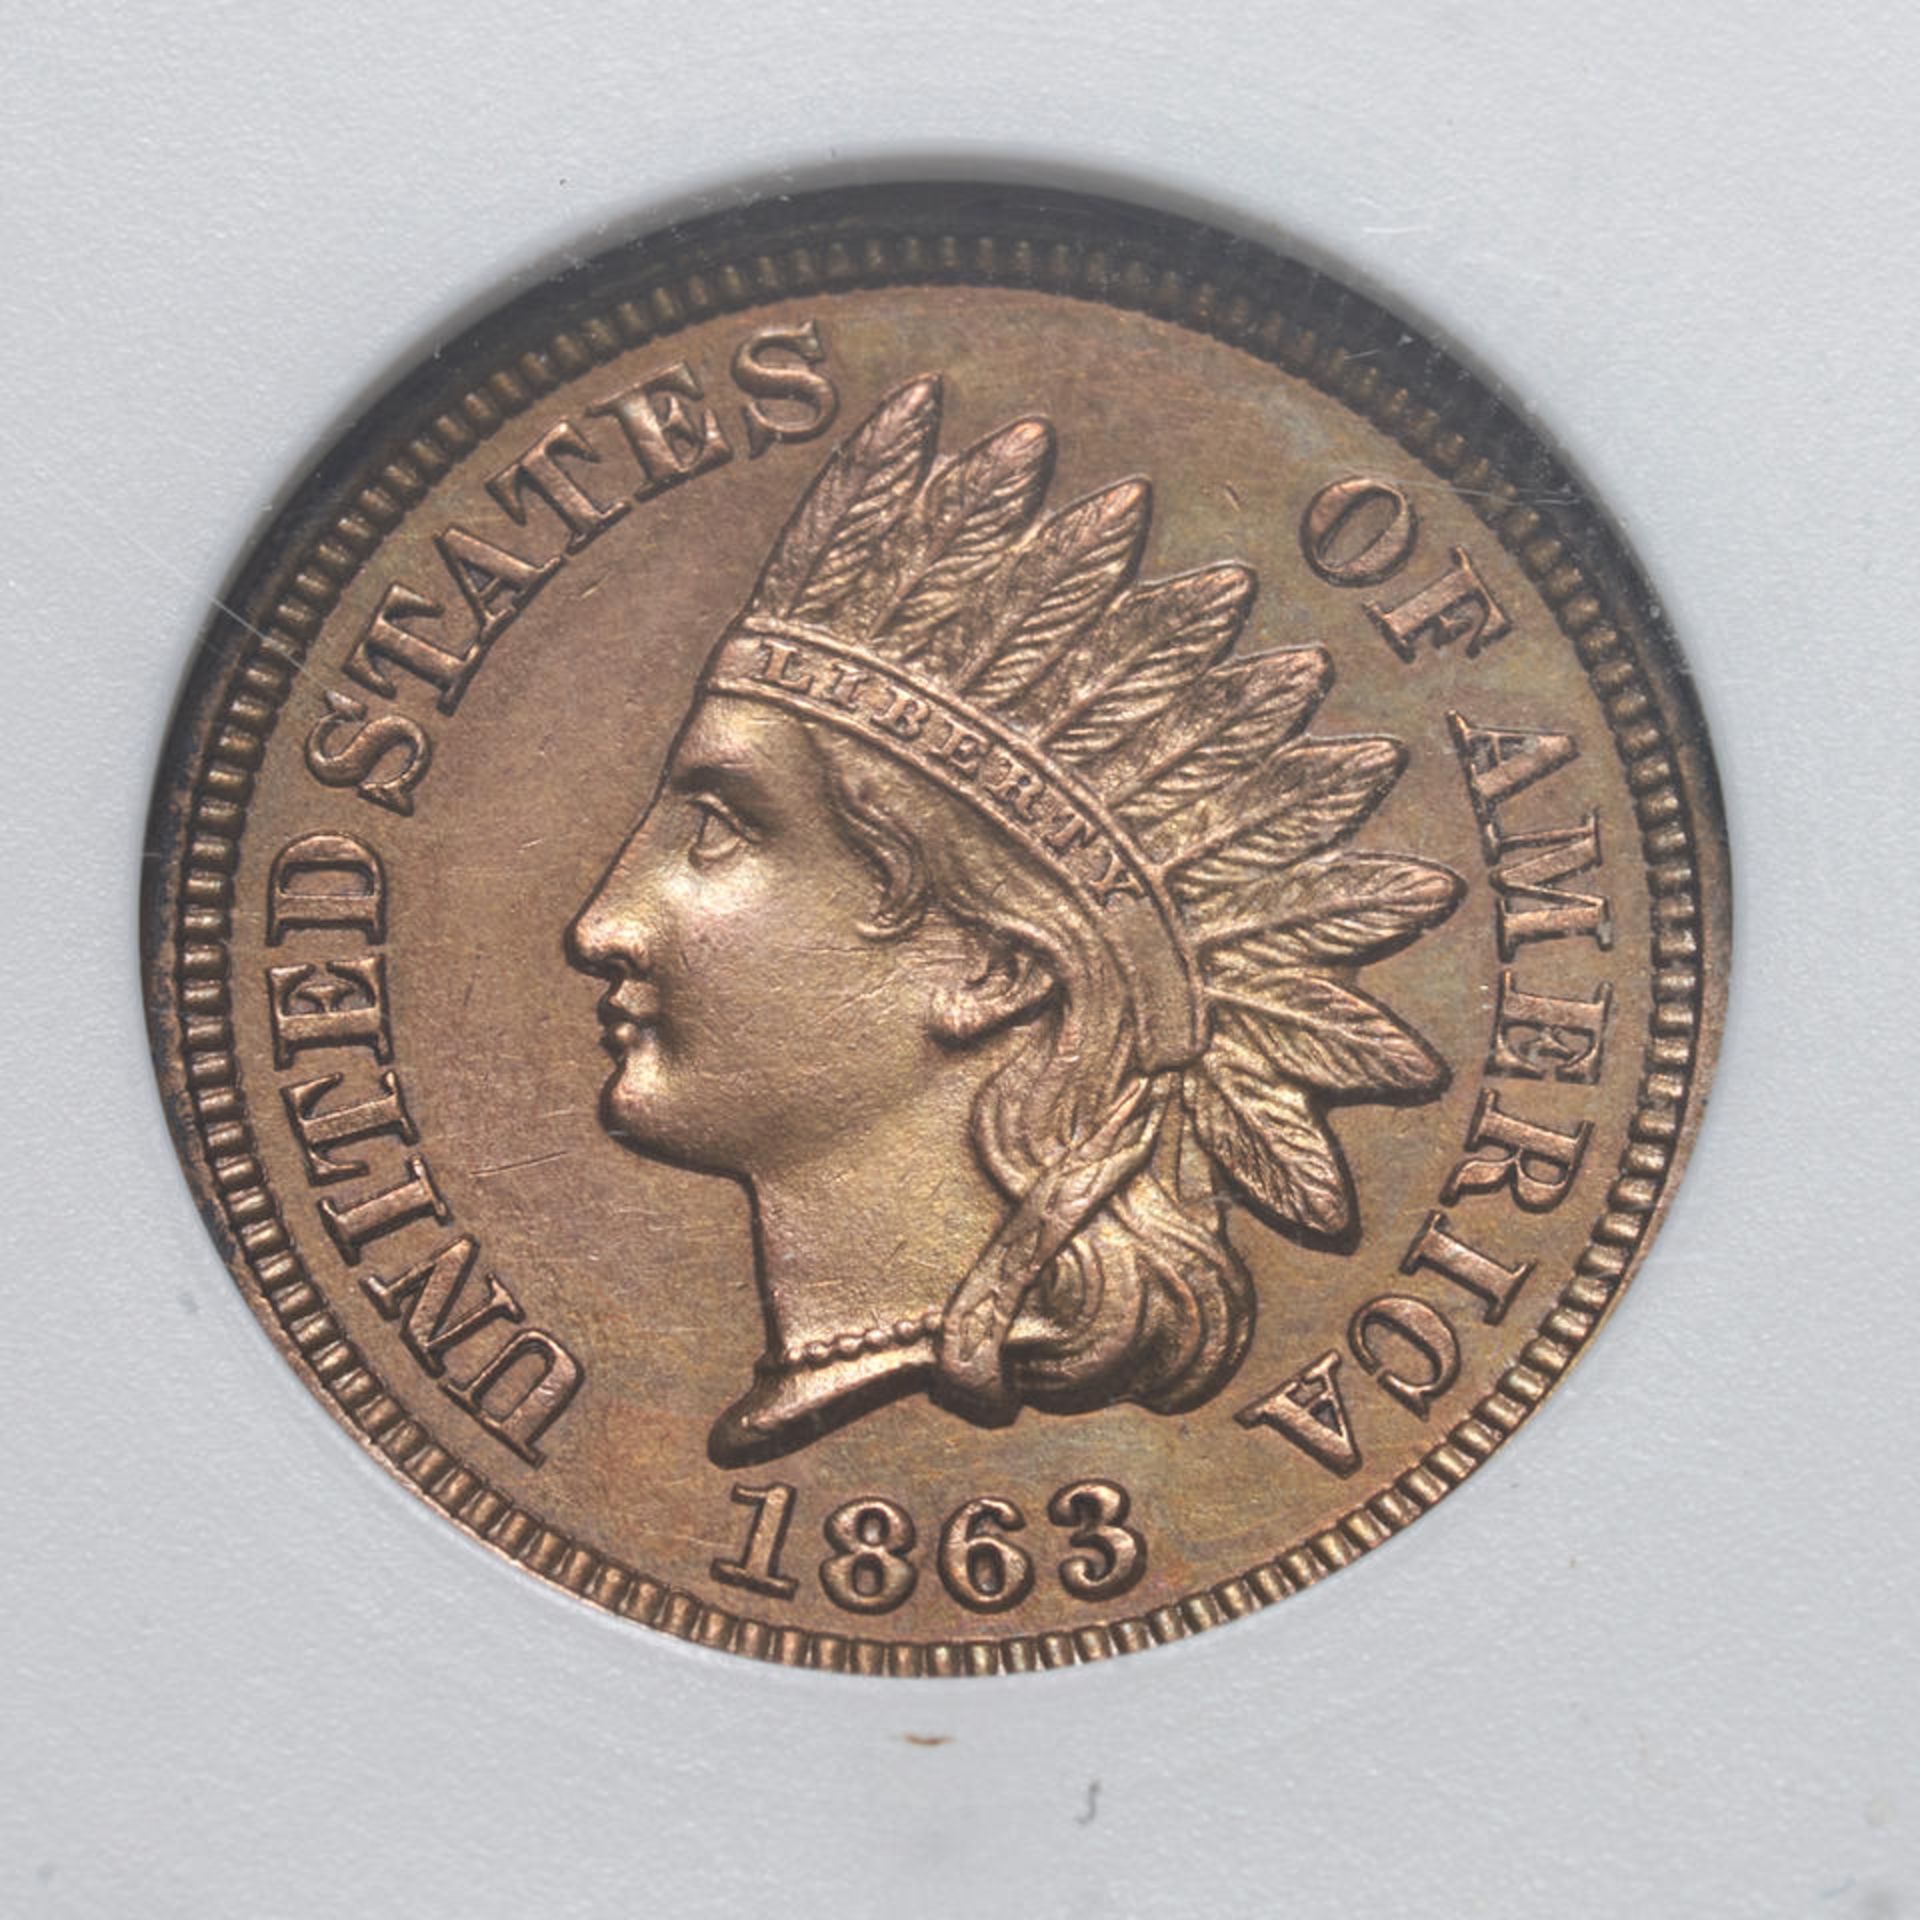 United States Four Indian Head Cents. - Image 4 of 6